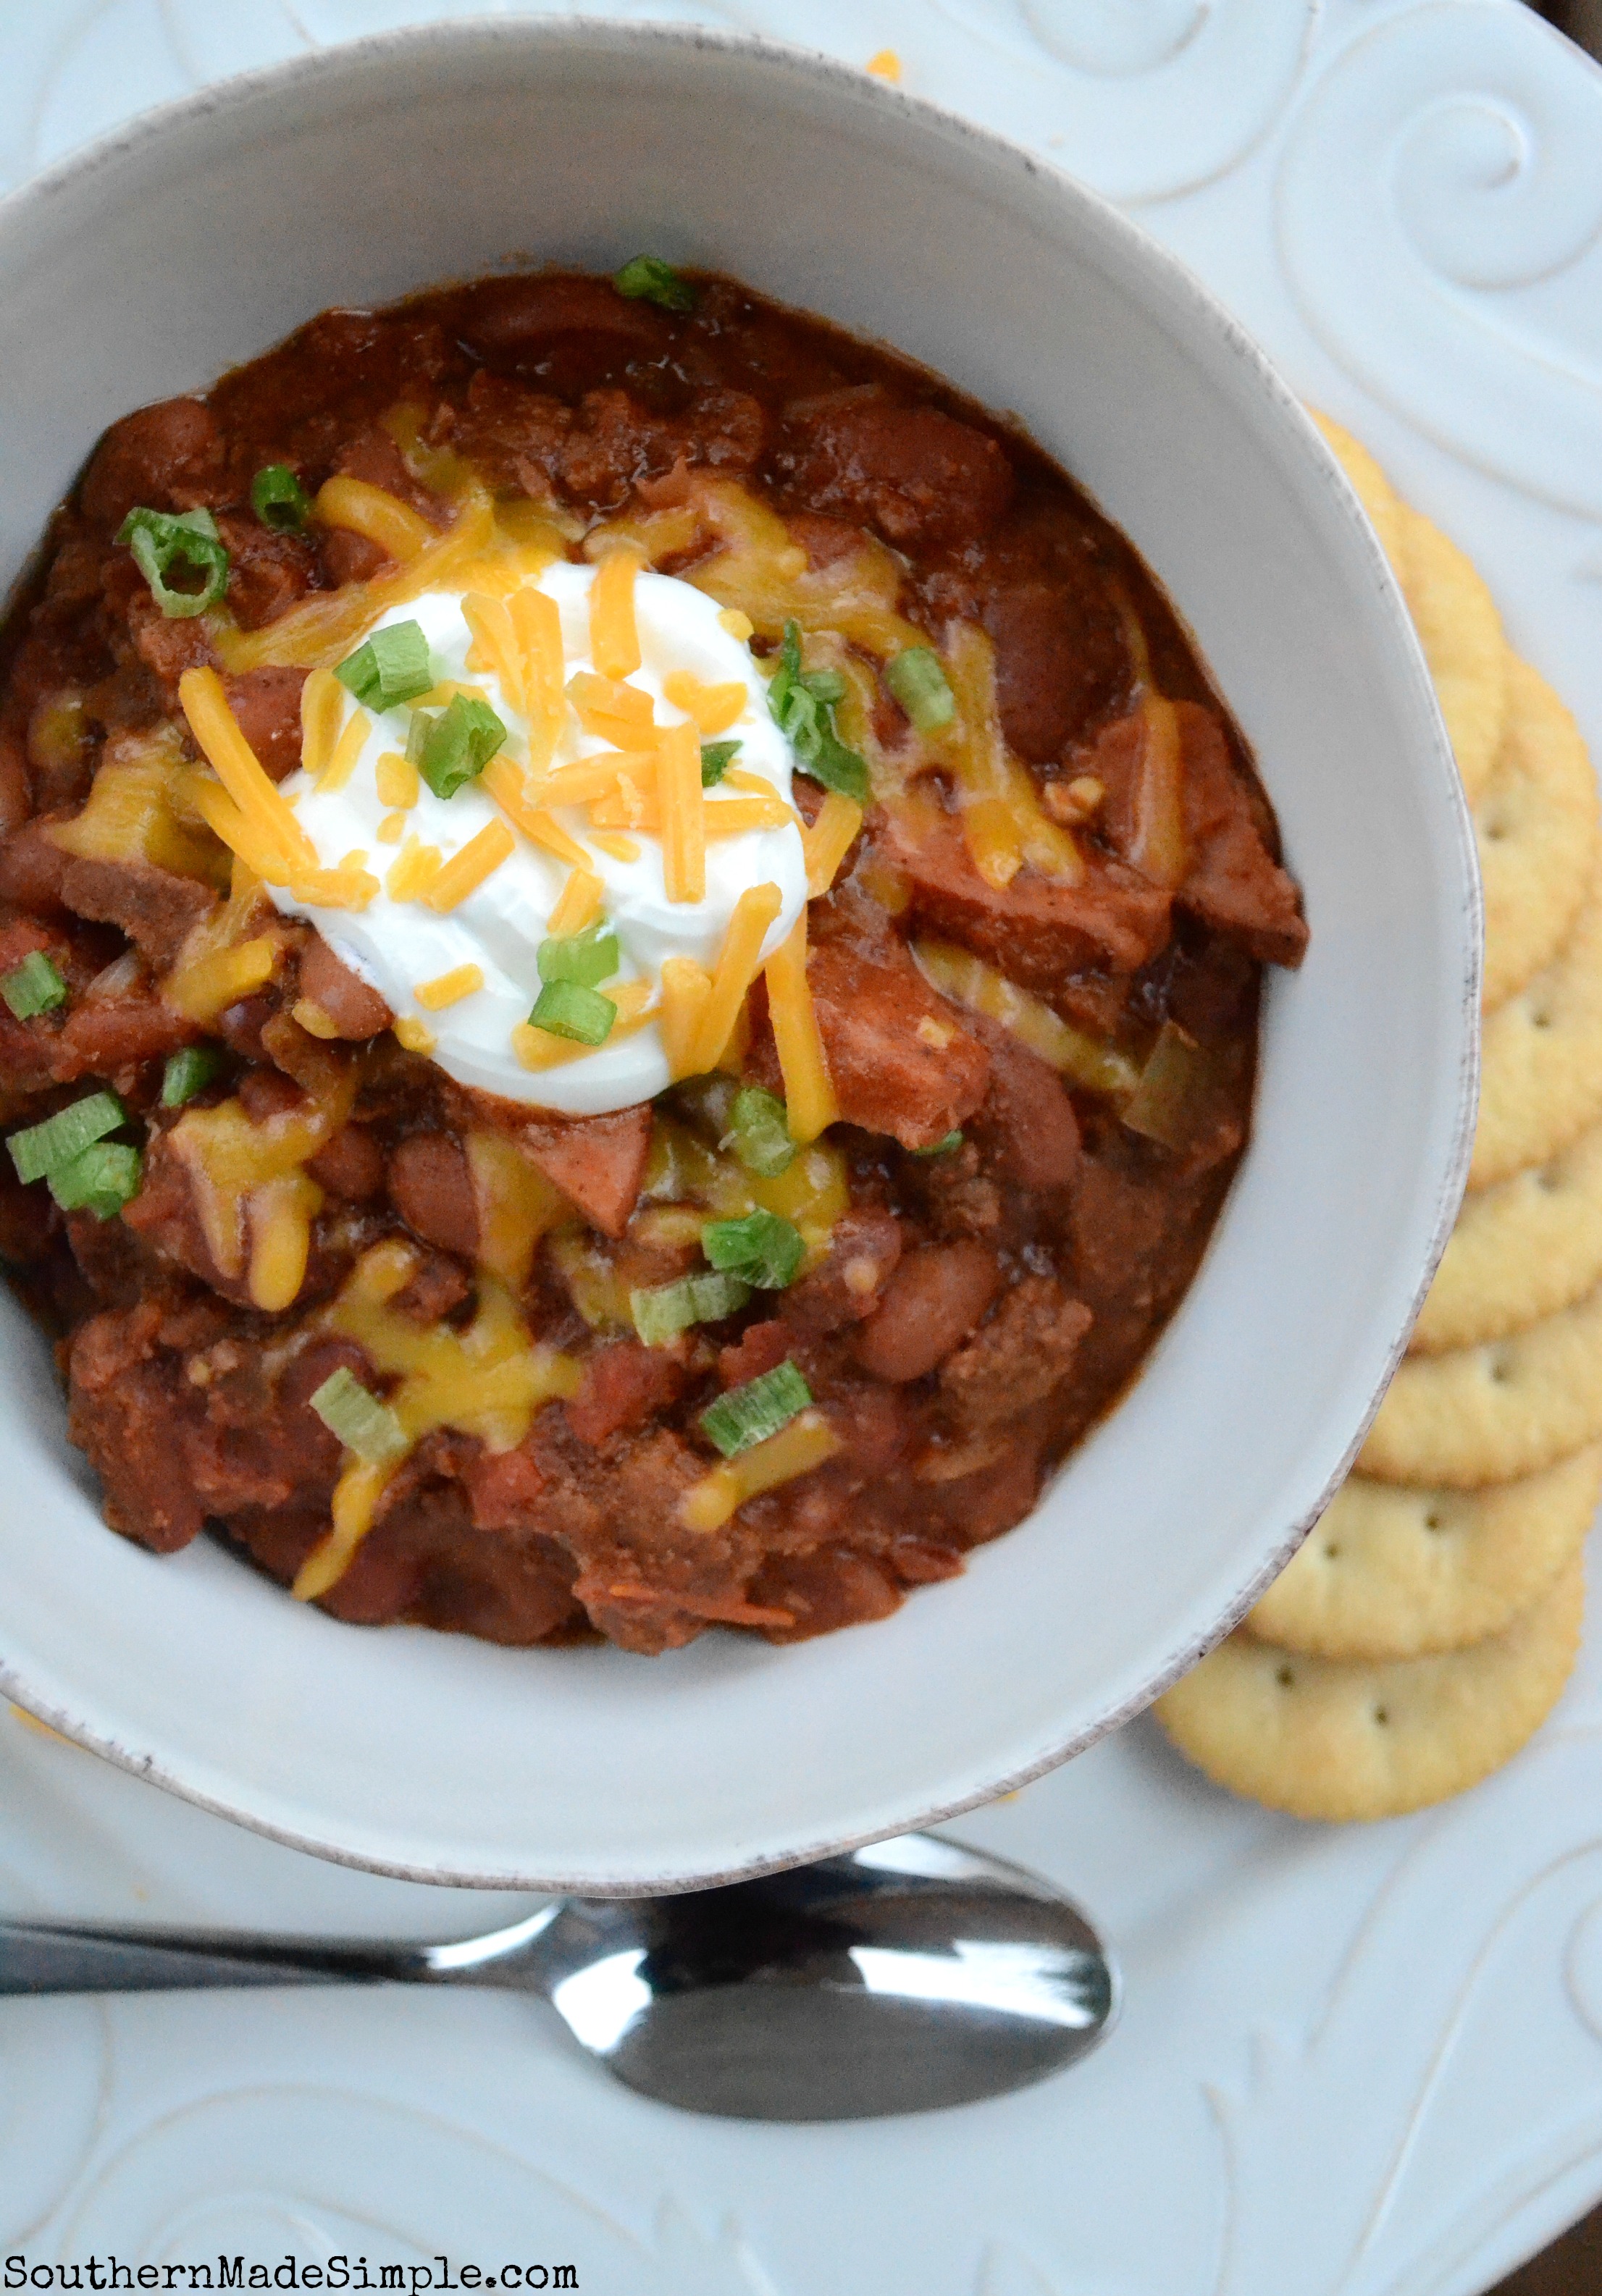 Venison and Sausage Chili is the perfect dish to warm you up on a cold winter night. It's so easy to make, and it's packed with delicious flavor!